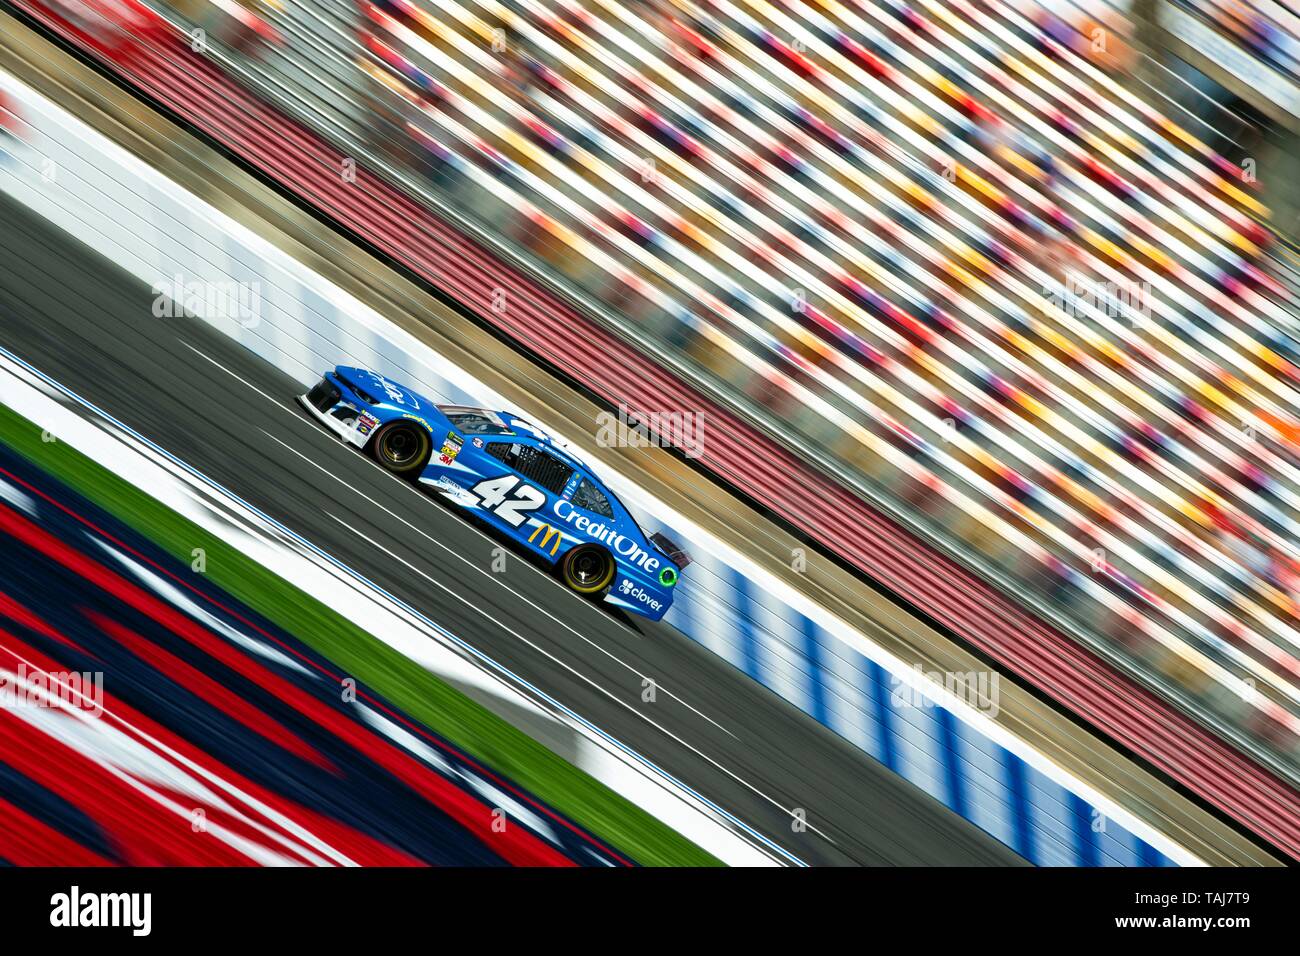 NASCAR driver Kyle Larson warms up for the Coca Cola 600 at Charlotte Motor Speedway May 25, 2019 in Concord, N.C. Larson will be driving in honor of Marine Sgt. Jeanette Lee Winters, who died on active duty, and her name will be on the windshield of his car. Credit: Planetpix/Alamy Live News Stock Photo